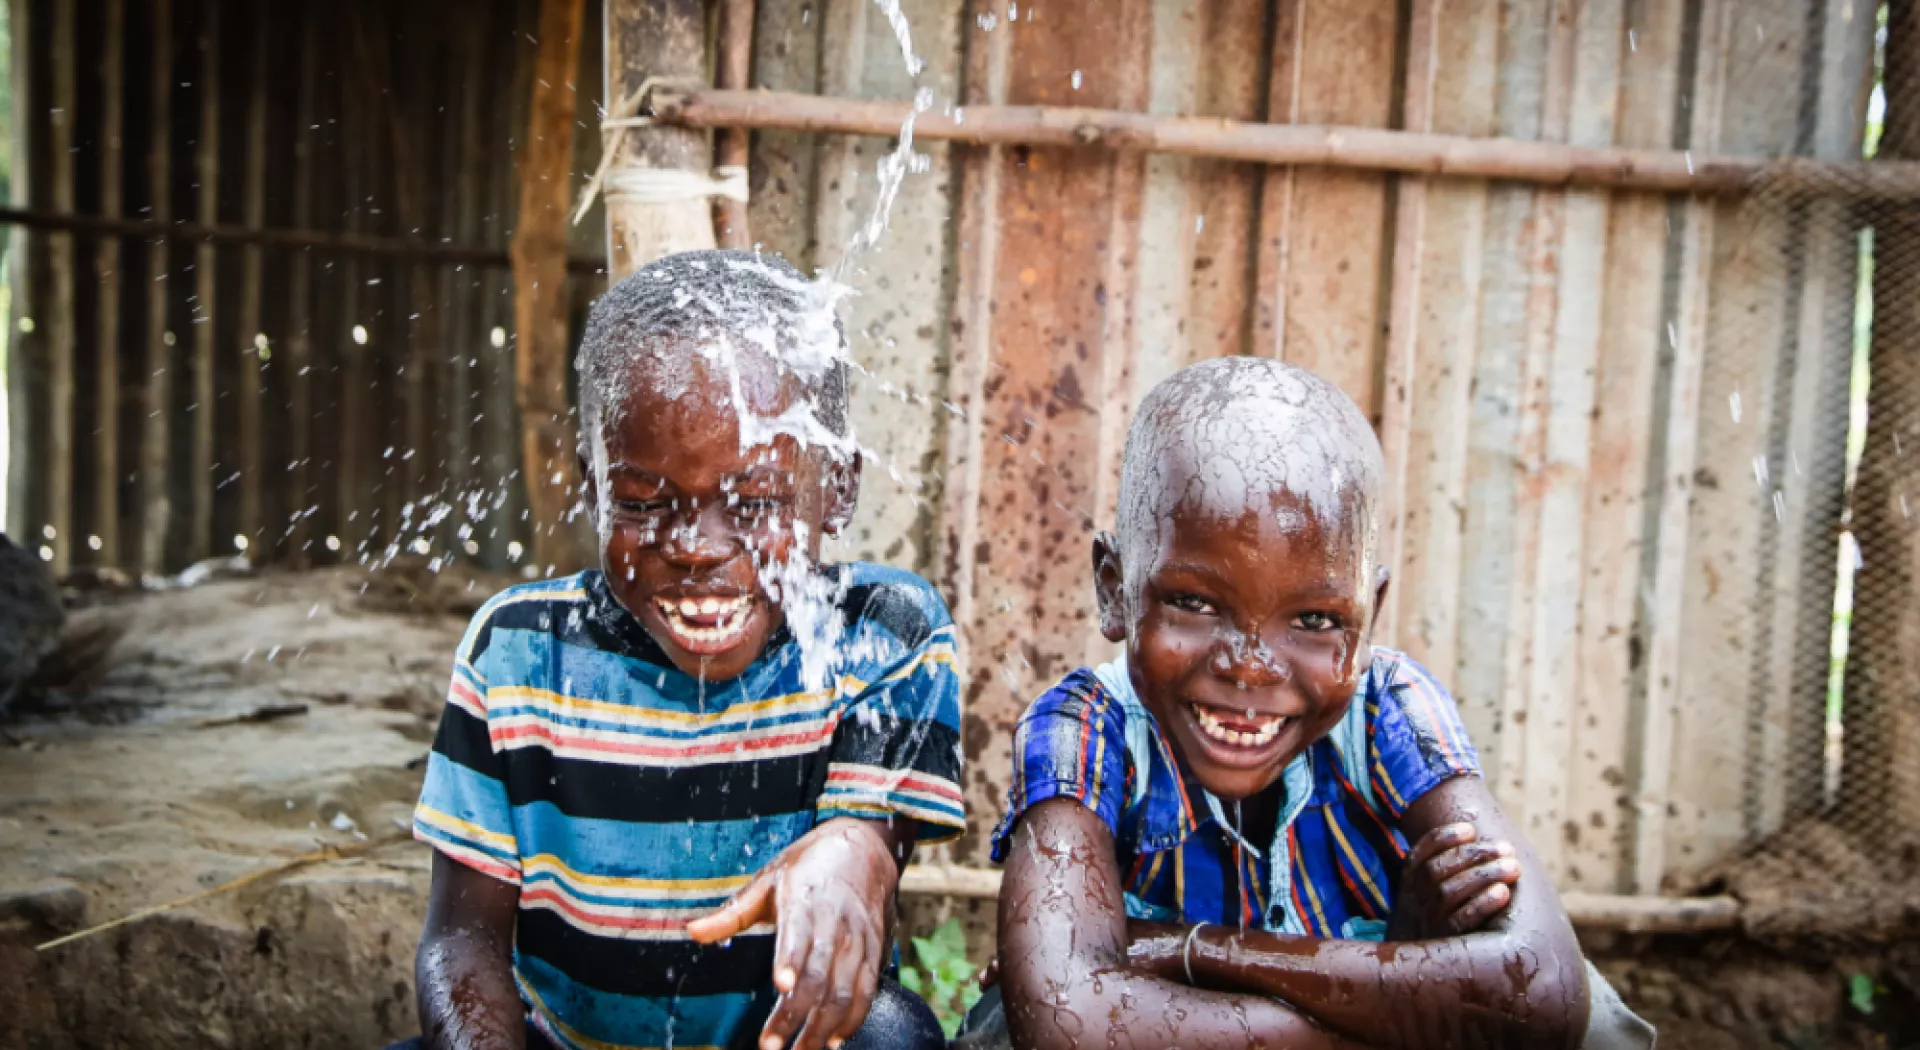 African children playing with water